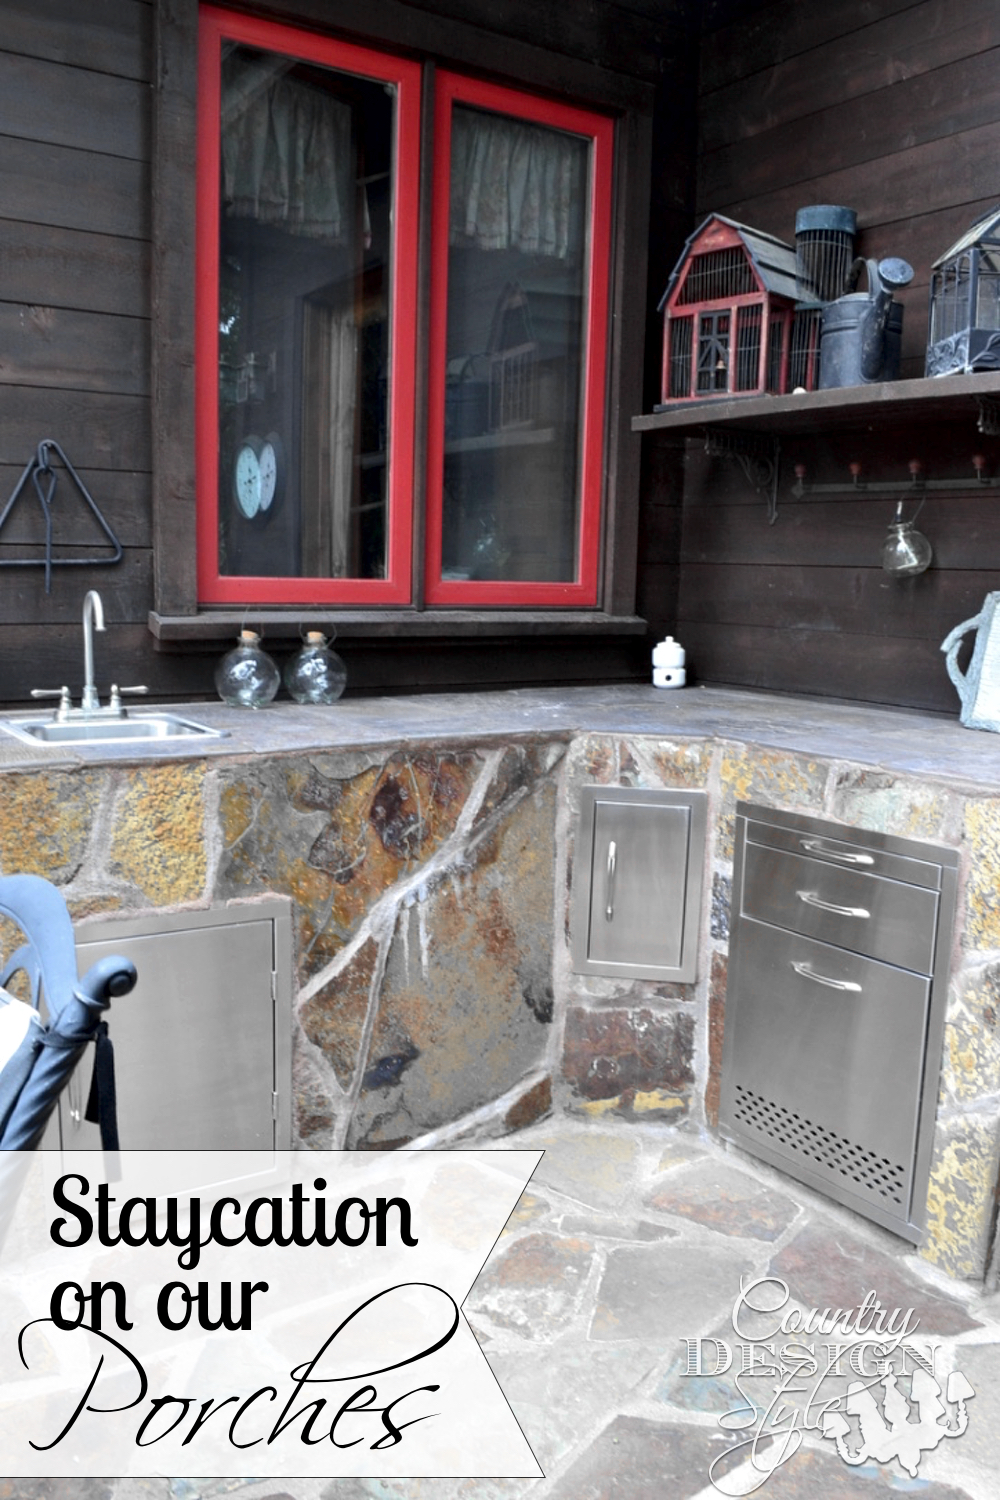 At full outdoor kitchen helps with a casual staycation. Country Design Style